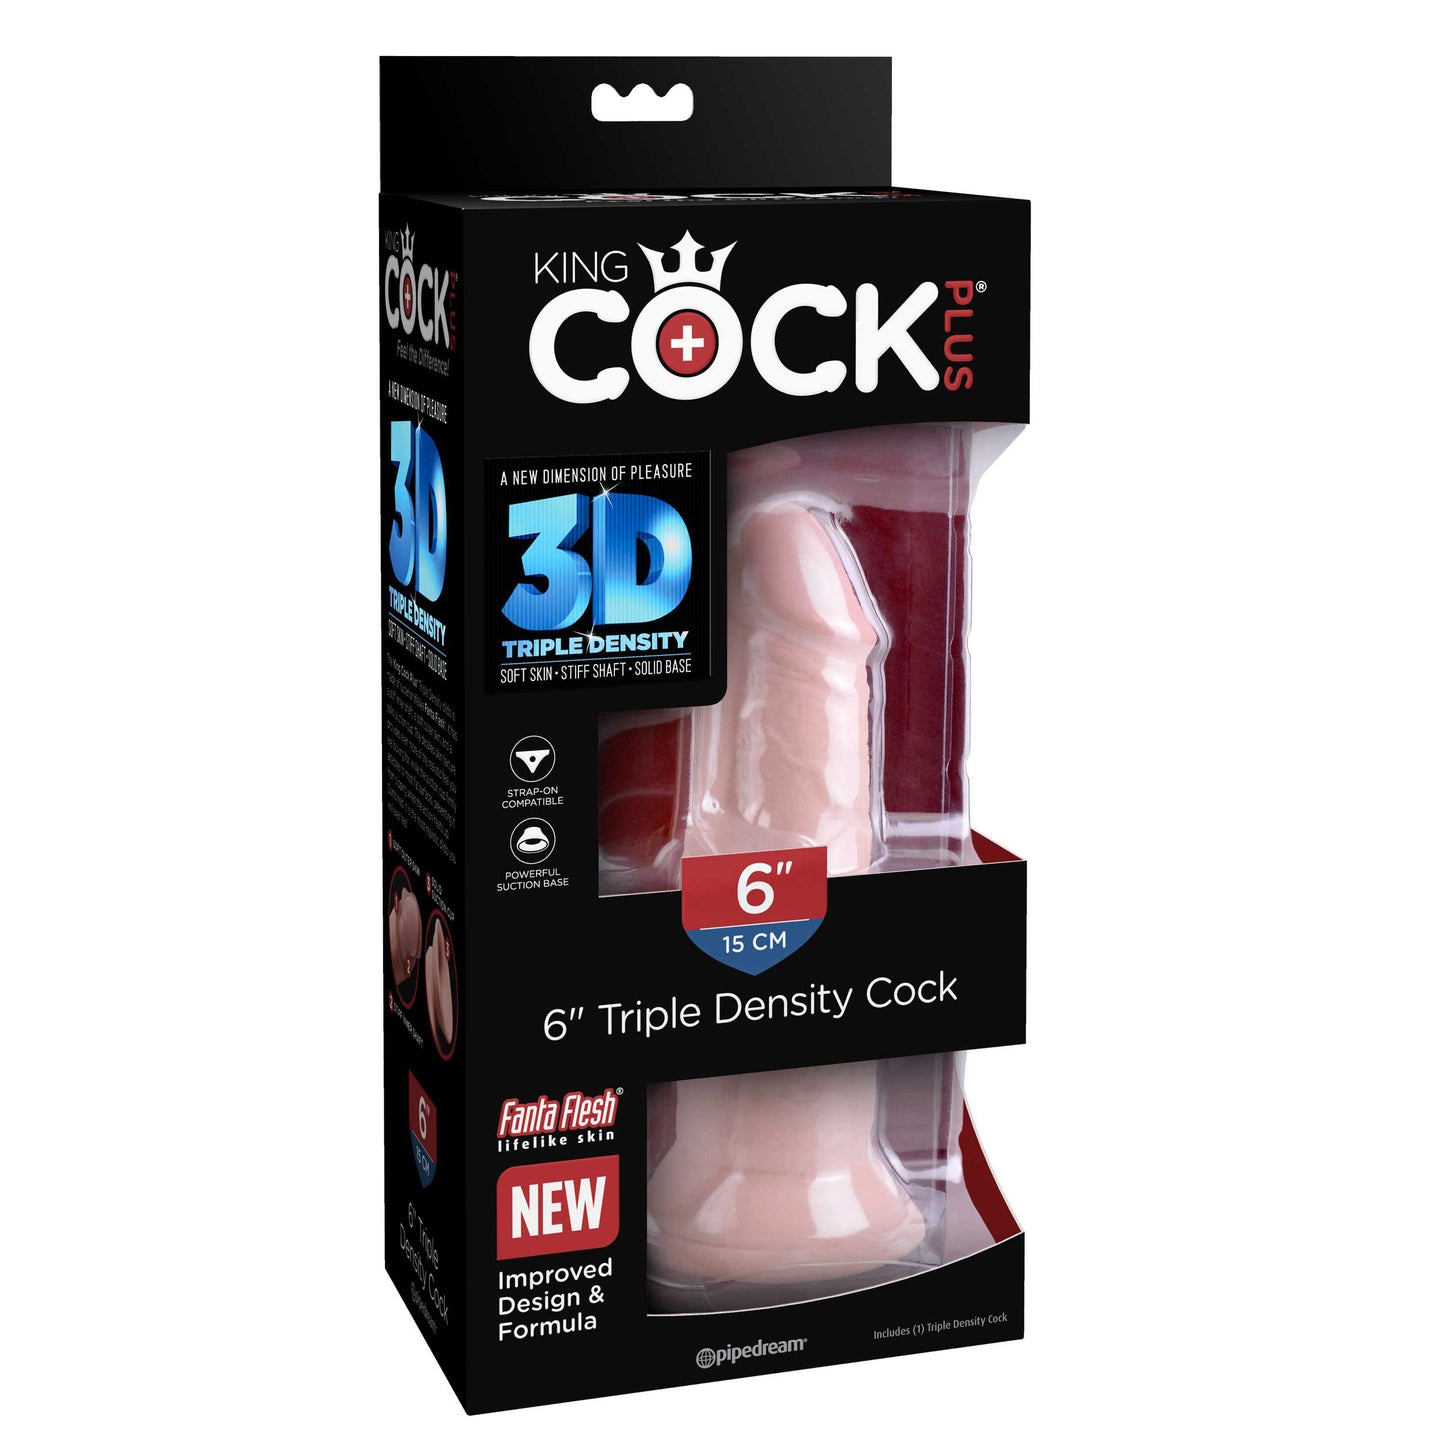 King Cock Plus 6" Triple Density Cock - Light - Thorn & Feather